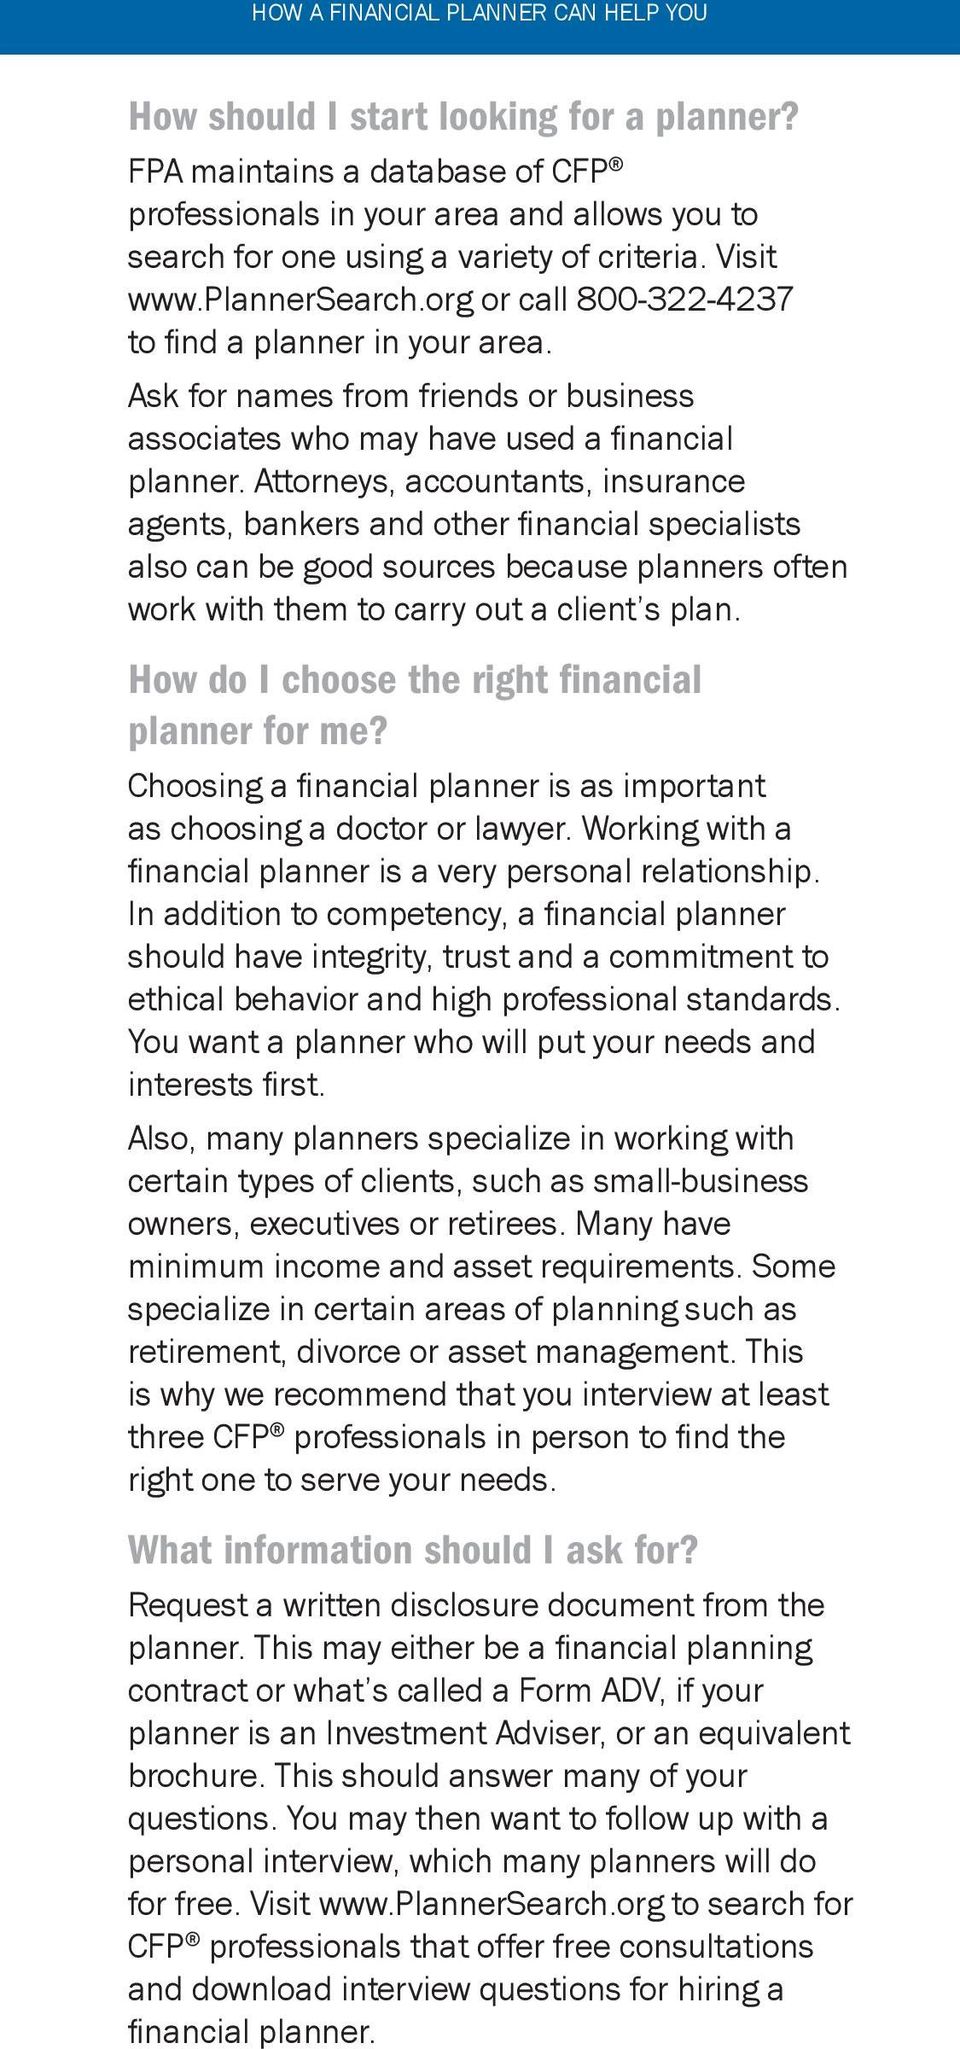 Attorneys, accountants, insurance agents, bankers and other financial specialists also can be good sources because planners often work with them to carry out a client s plan.